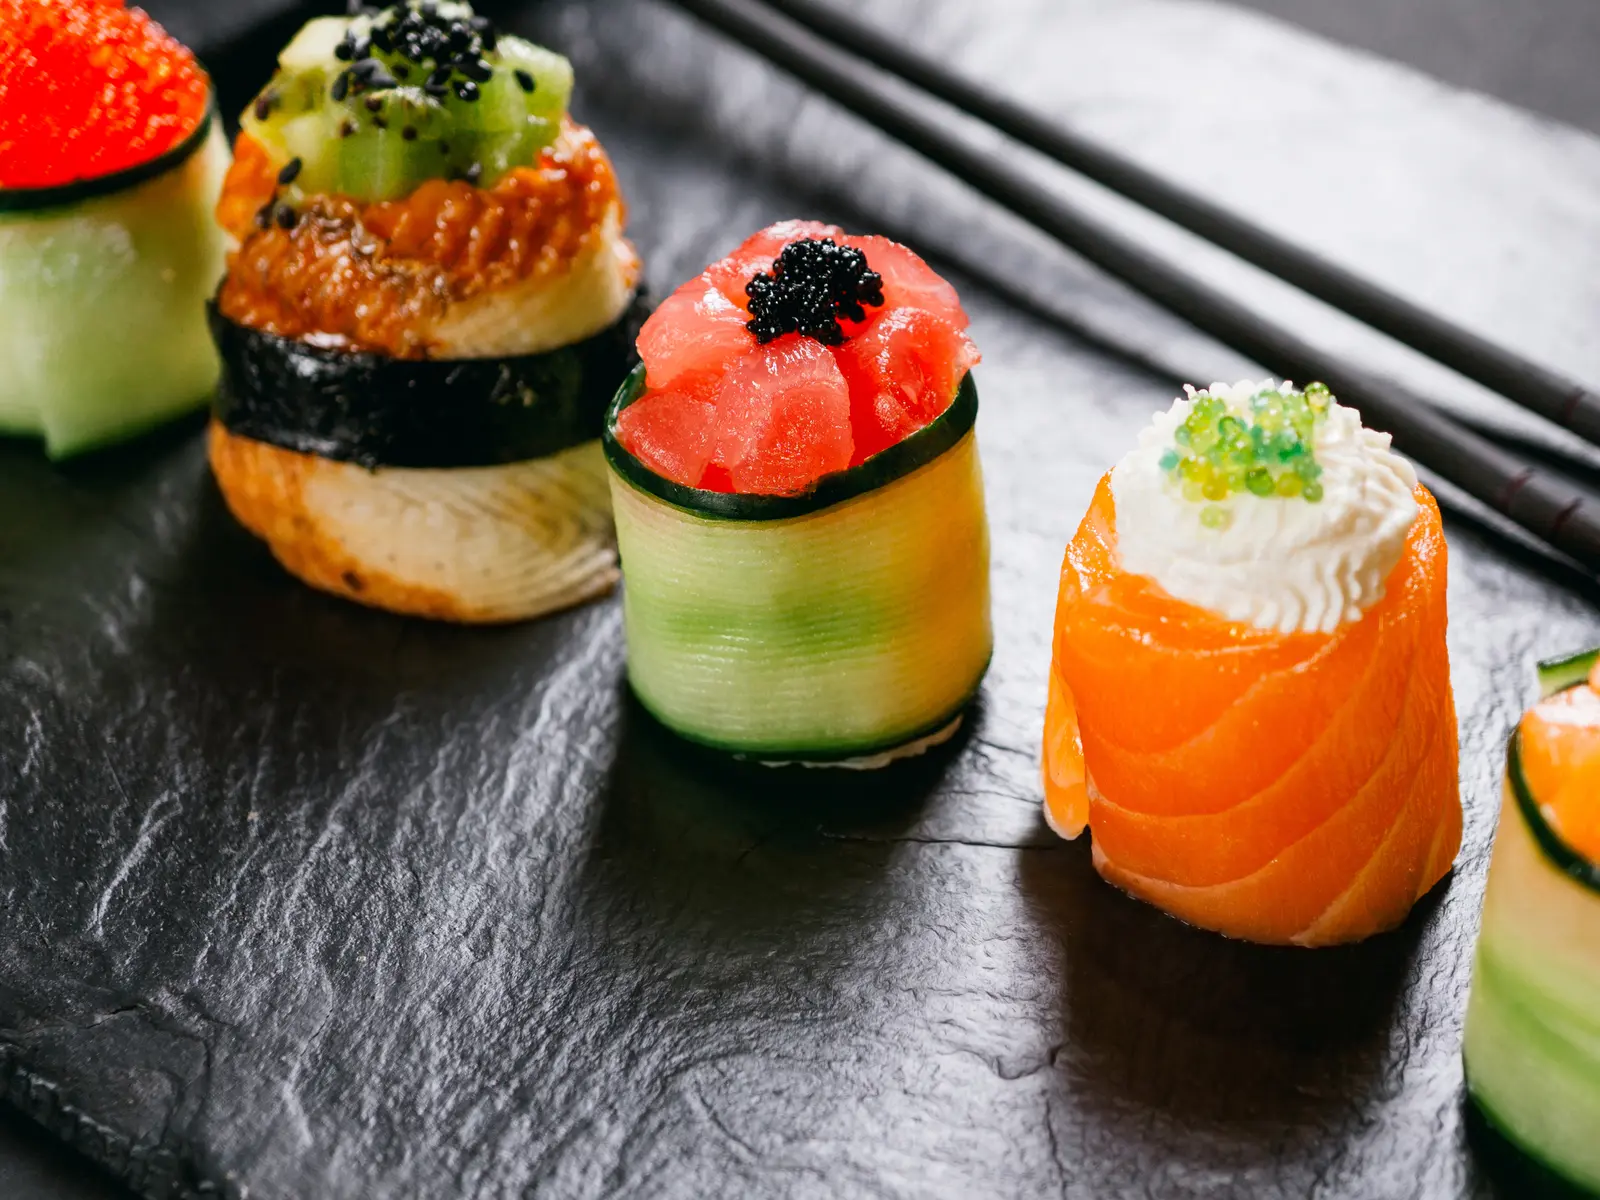 What are some creative or unconventional sushi combinations?